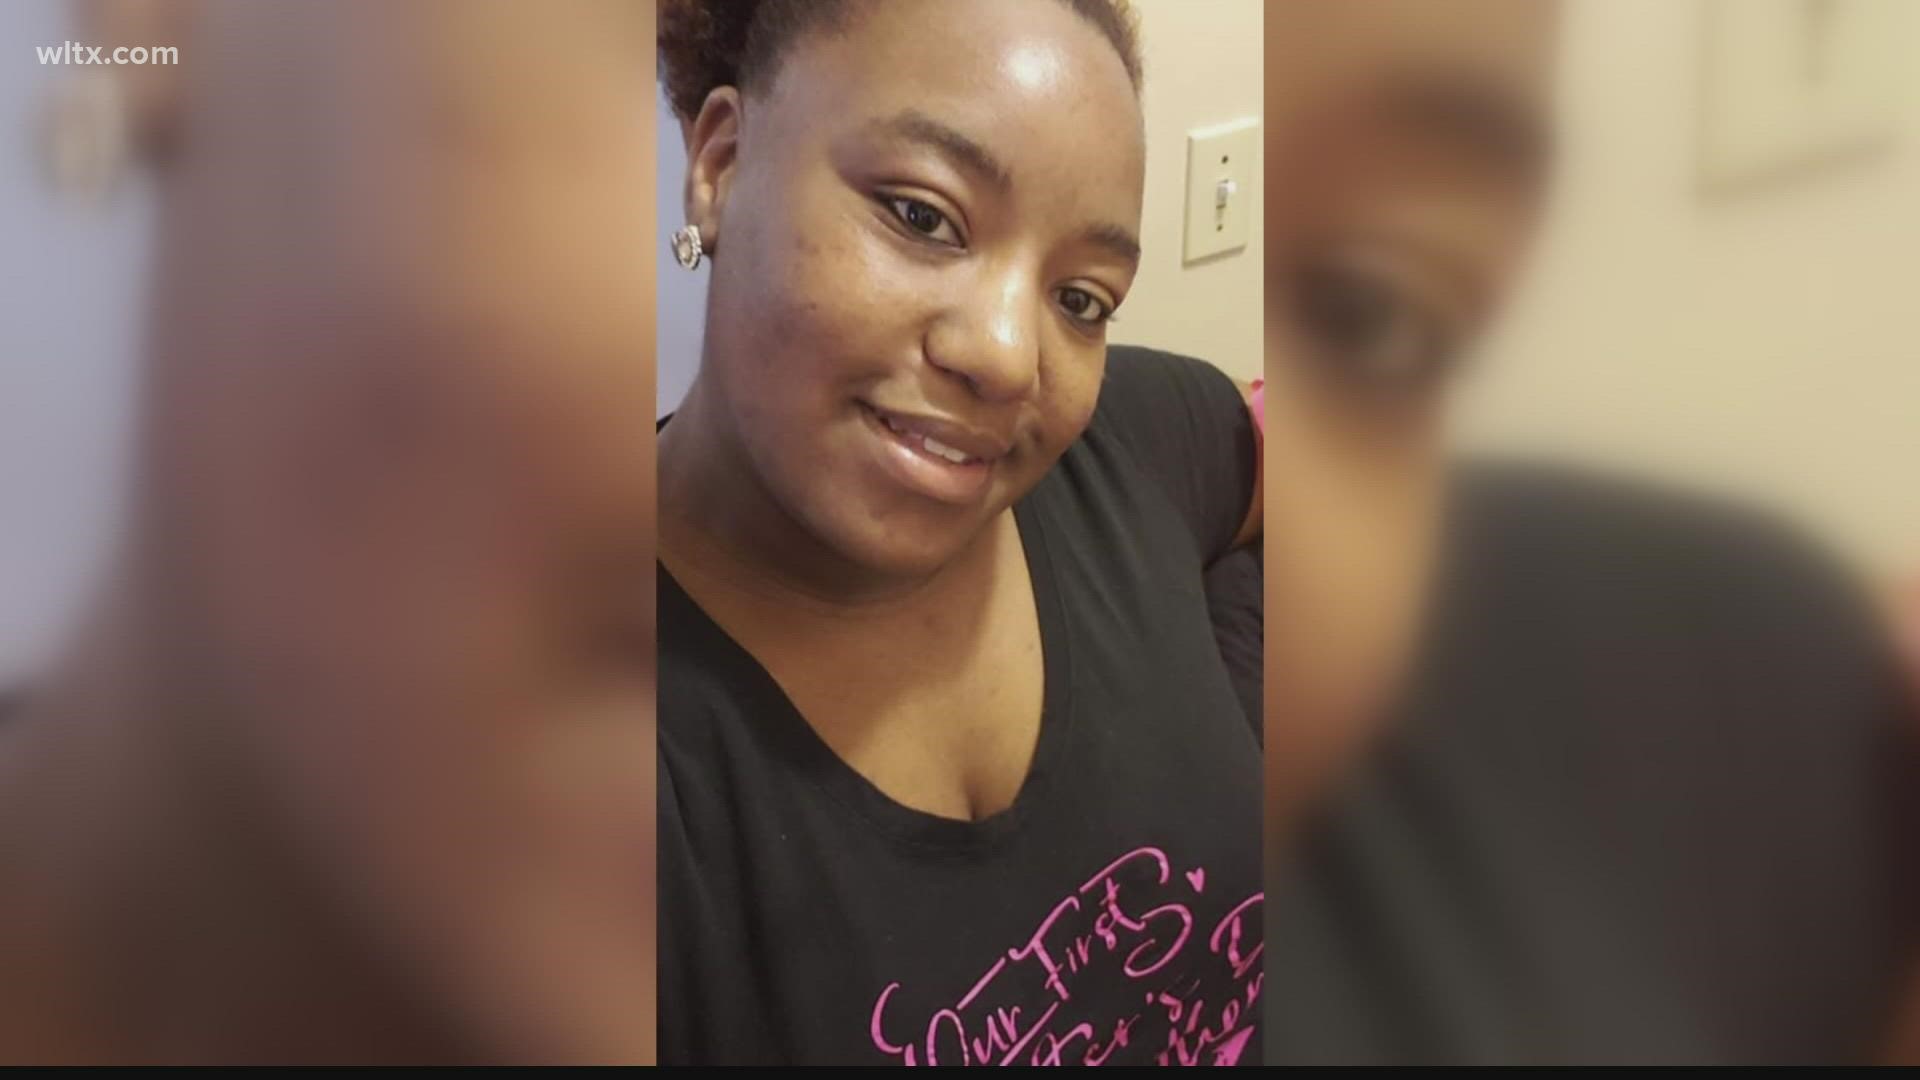 Police have arrested the ex-boyfriend of a North Carolina woman whose body was found Thursday in Fairfield County, South Carolina.